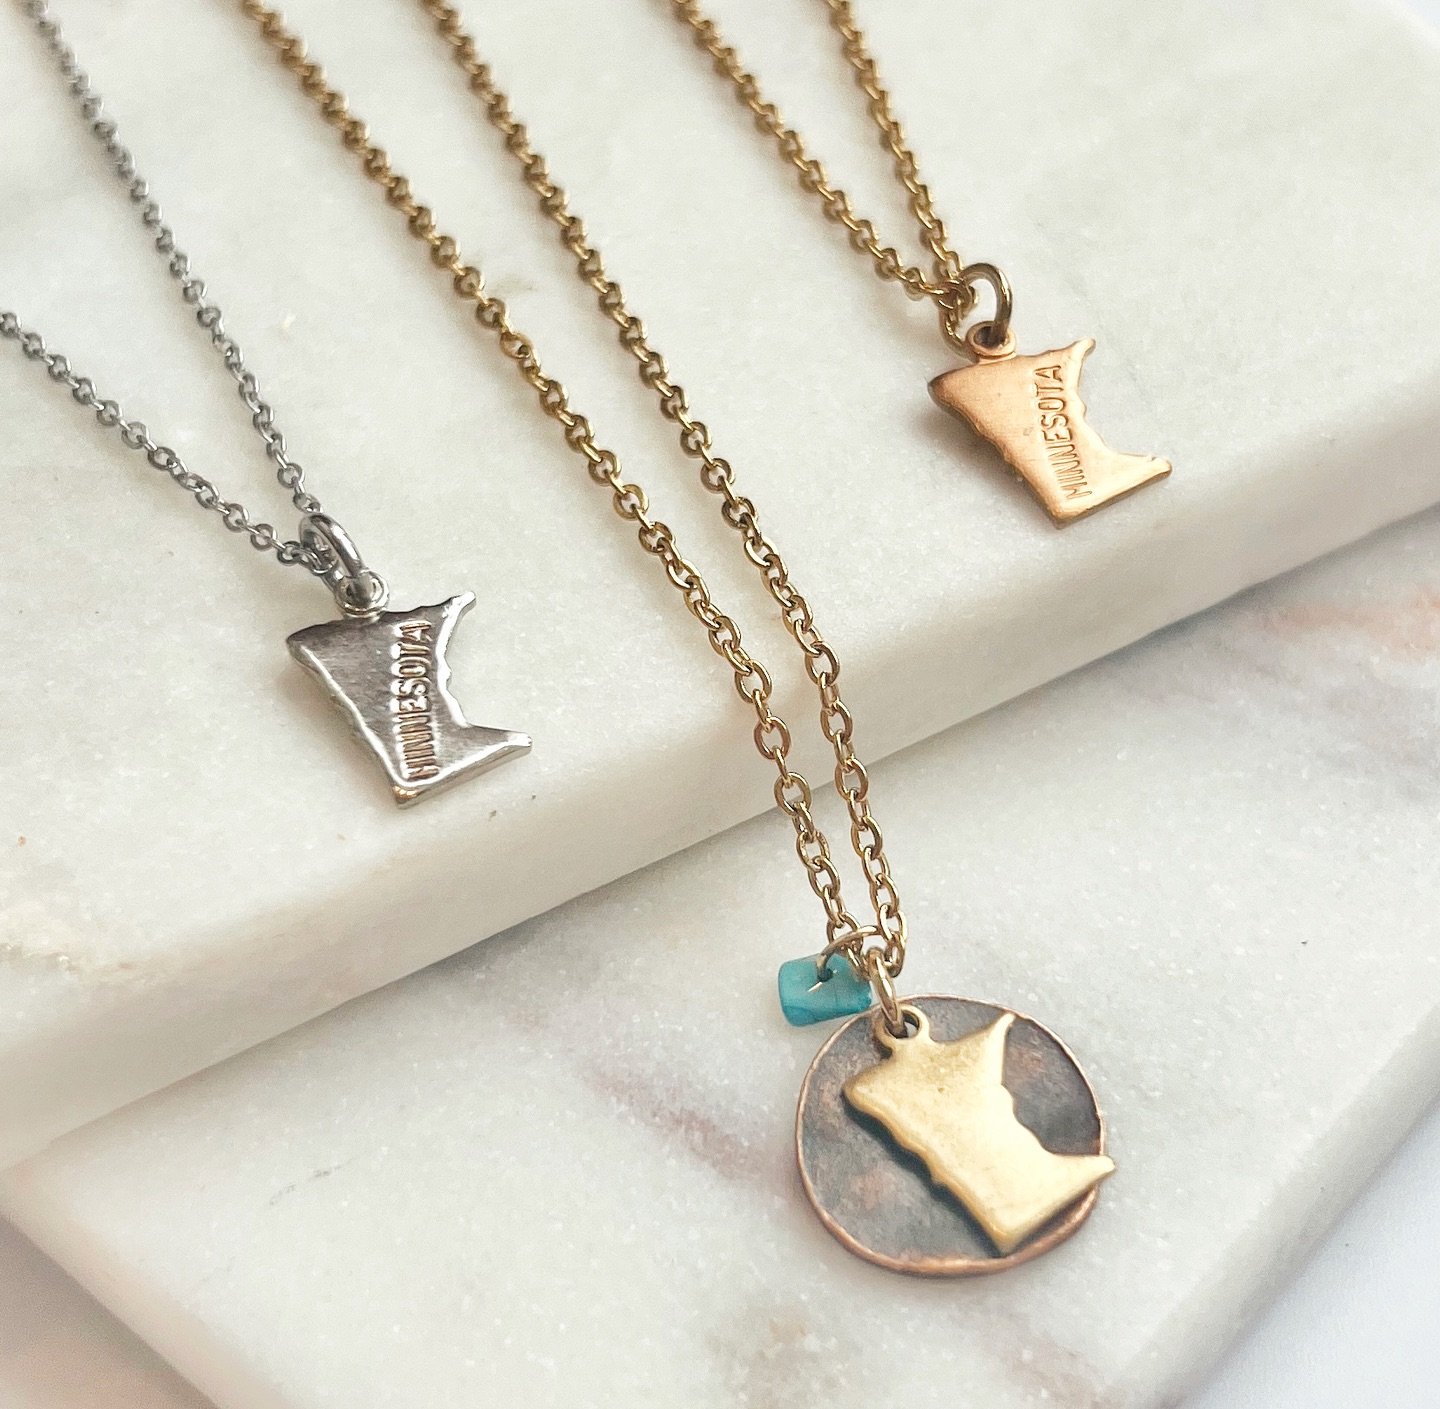 Are you celebrating a special graduate this weekend? I want them to have the perfect gift to remember their time in Minnesota?

We have the perfect gift, small enough to take anywhere and cute enough to wear every day!

Our dainty Minnesota necklace 